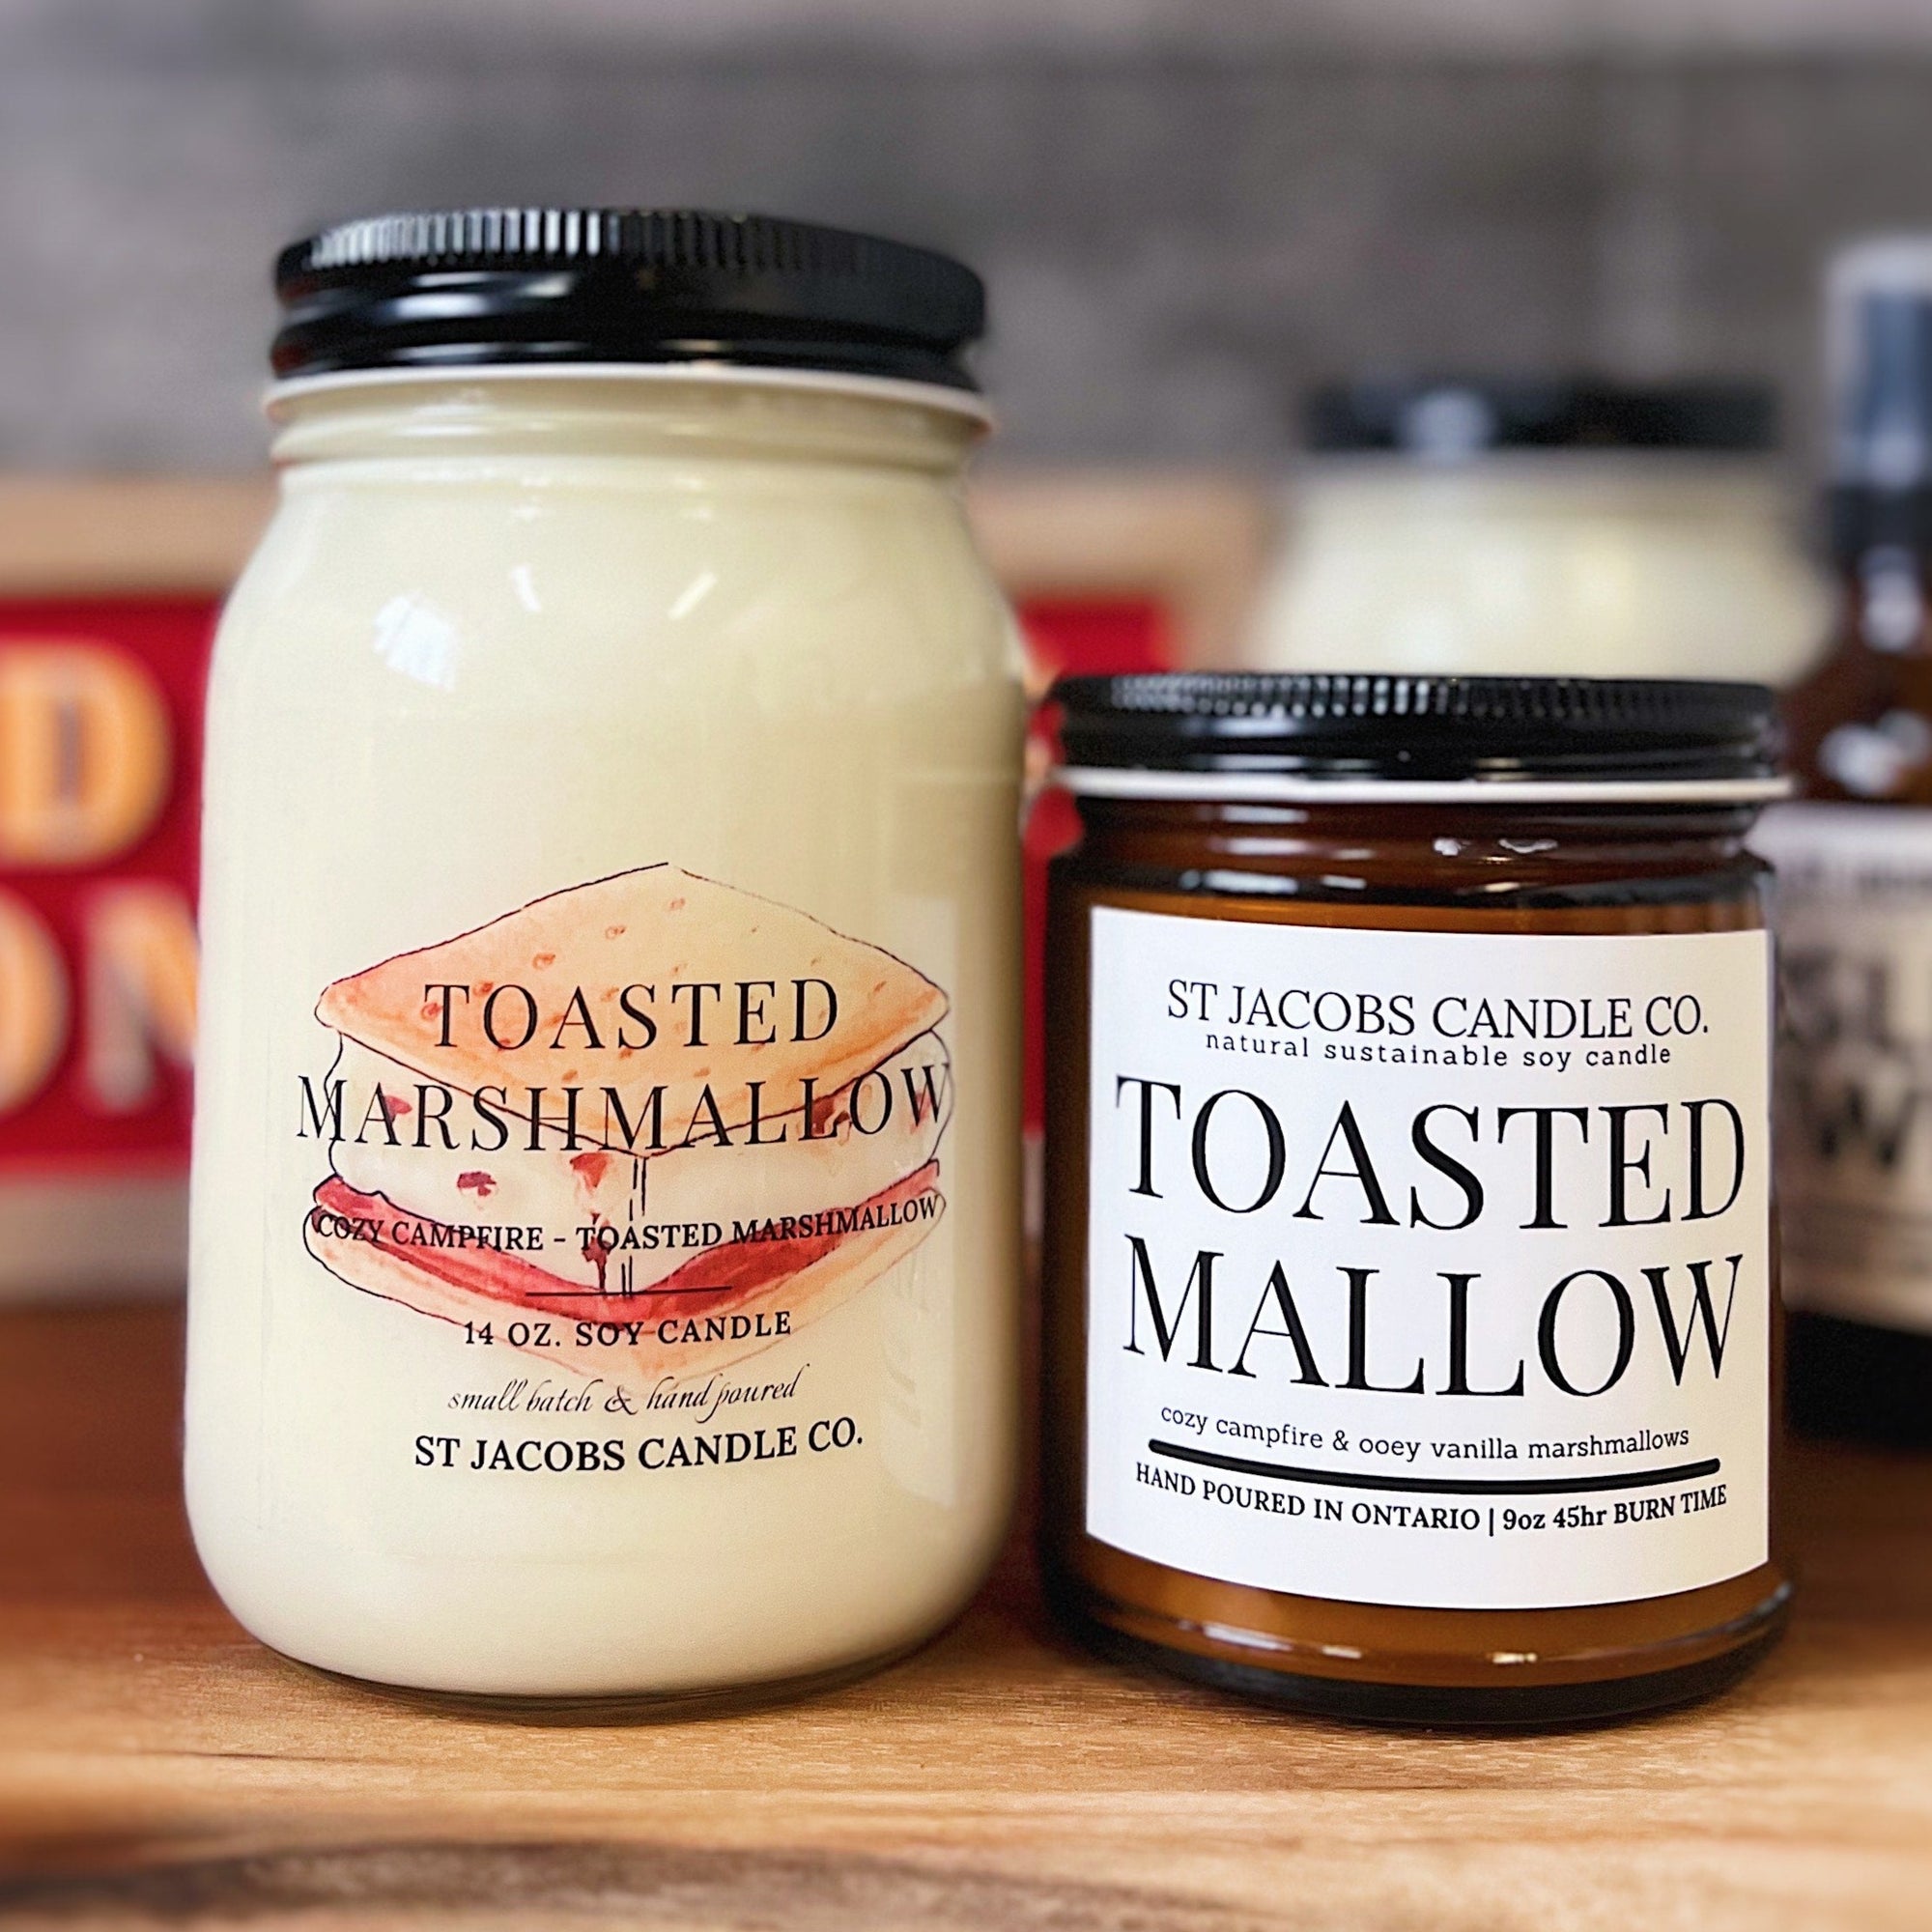 "TOASTED MARSHMALLOW" Natural Soy Candle